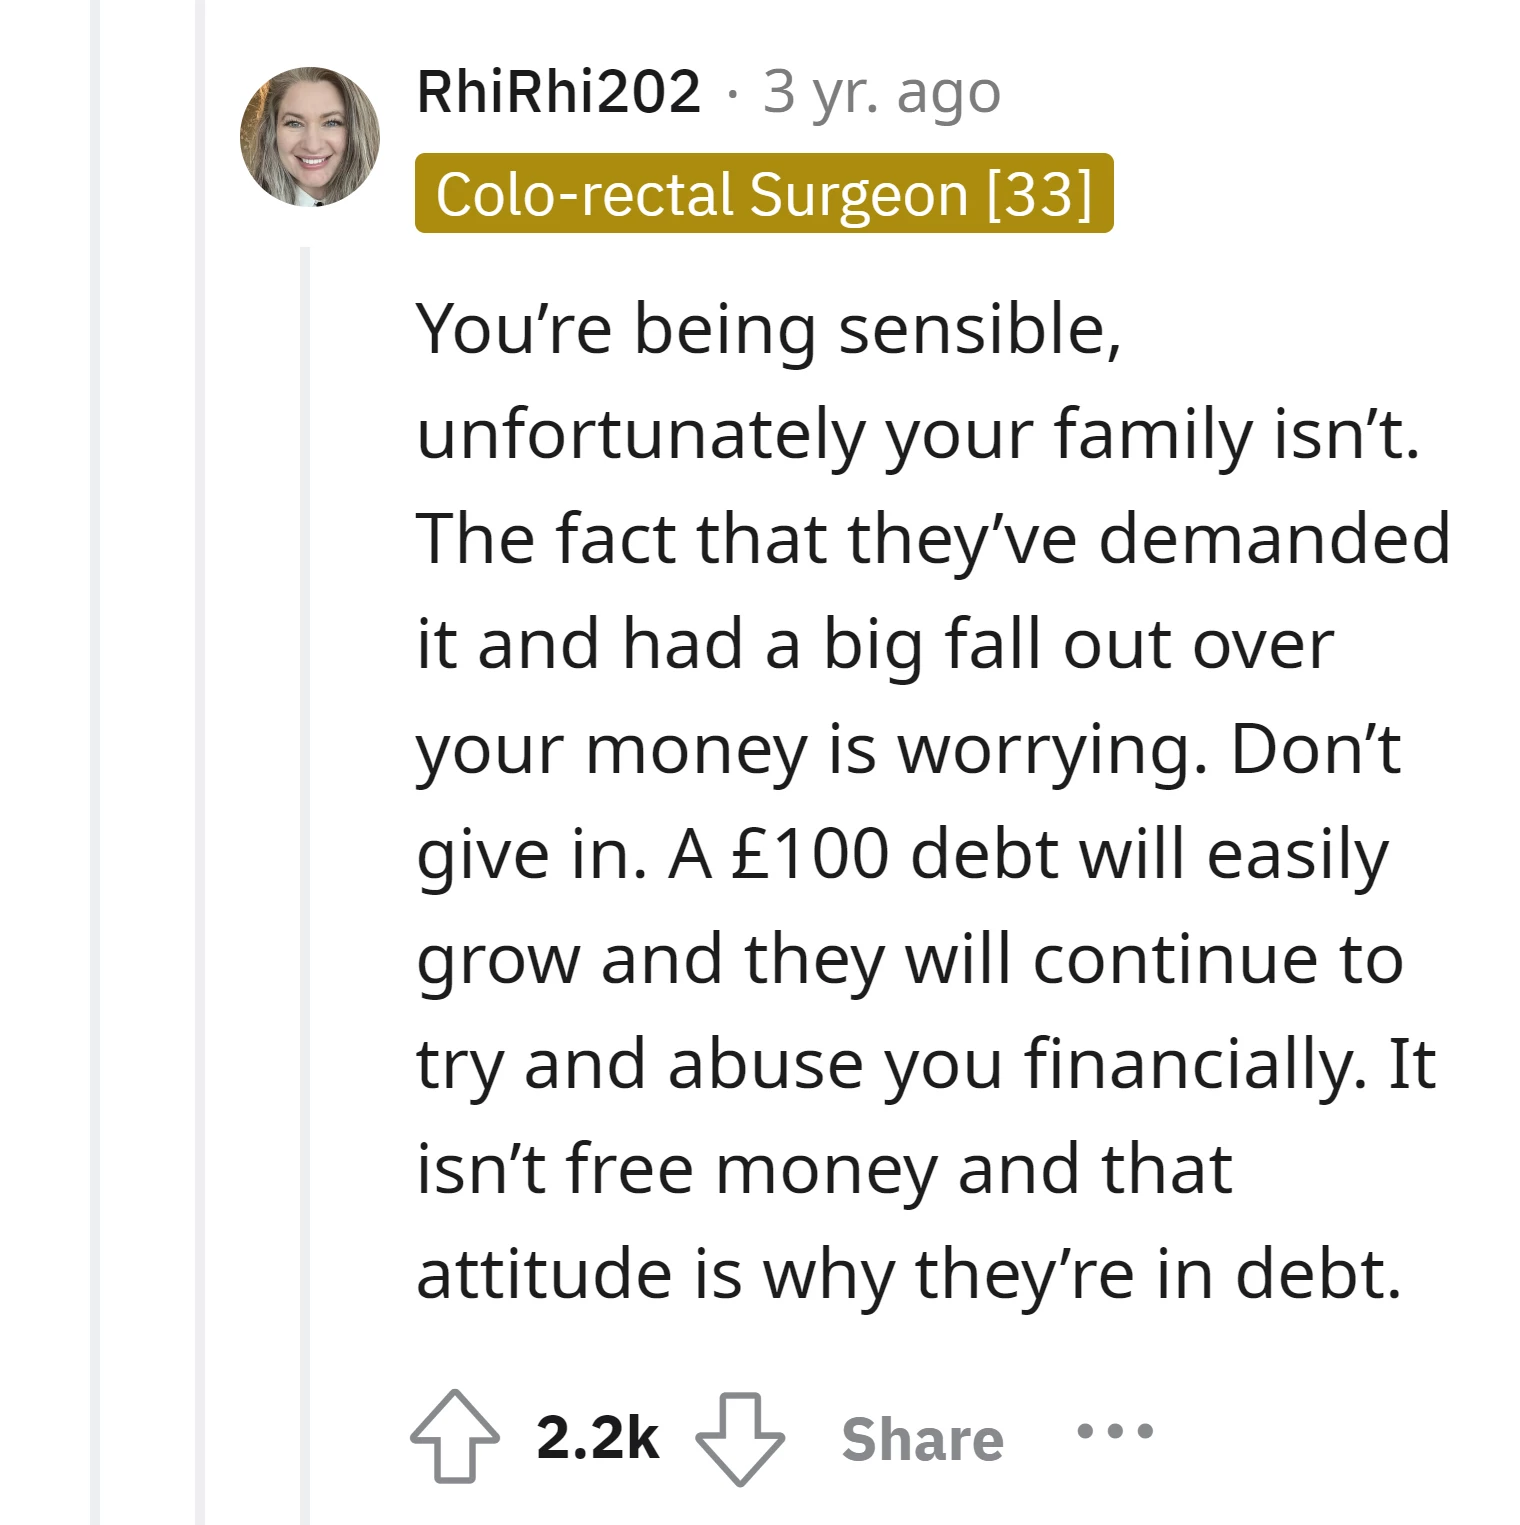 Your family's demanding behavior over your money is concerning